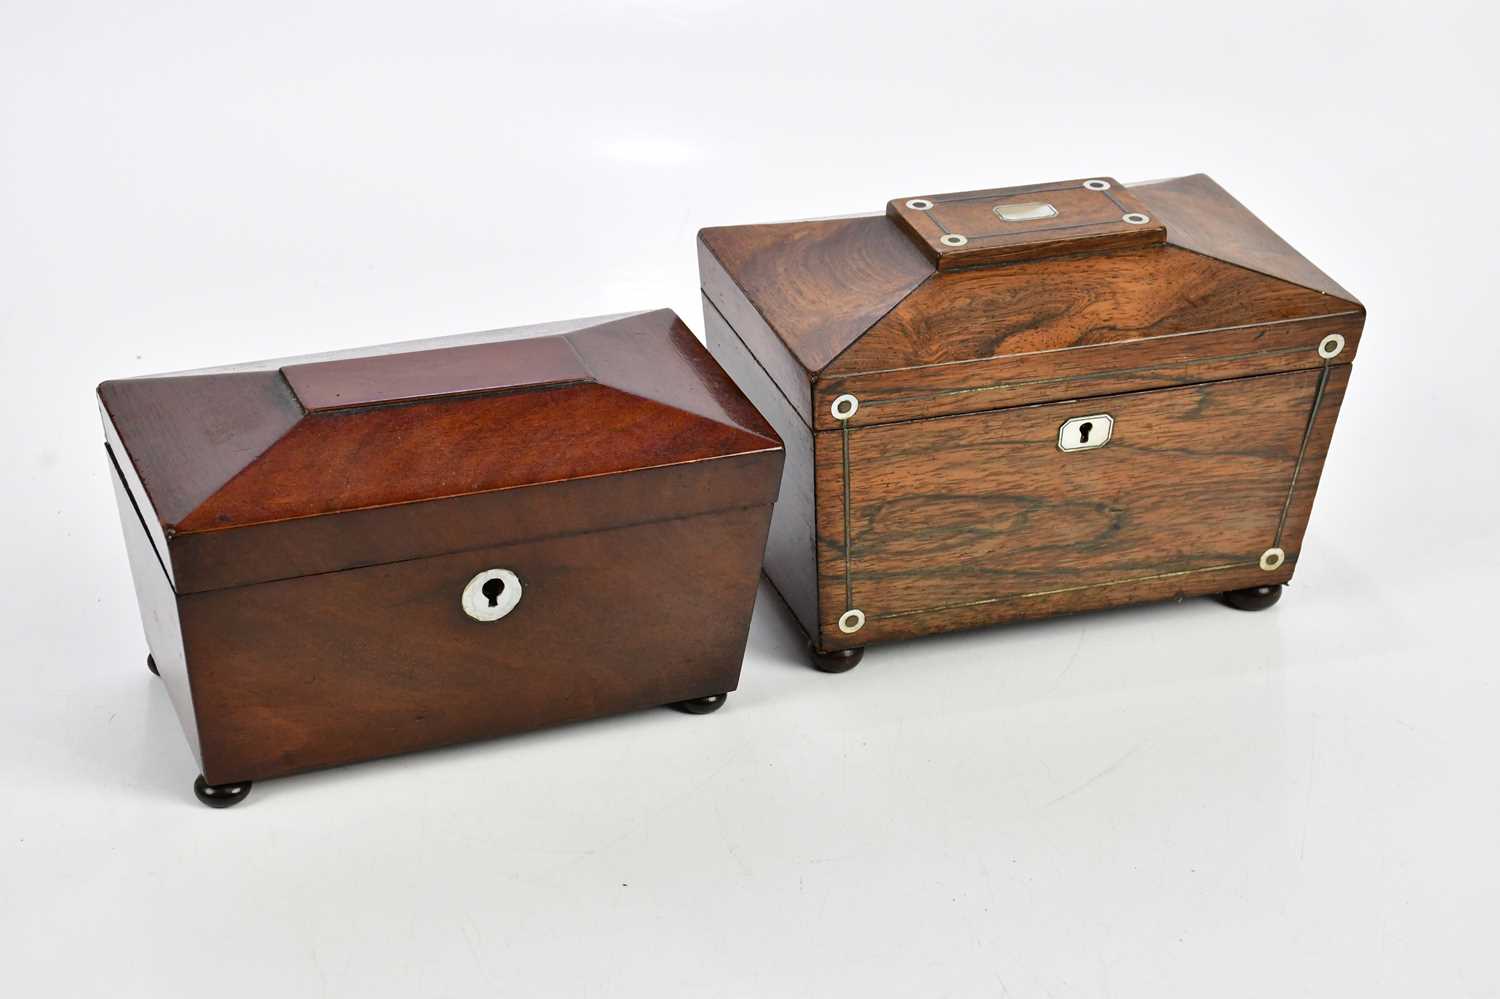 A 19th century rosewood sarcophagus shaped tea caddy with mother of pearl inlay, together with an